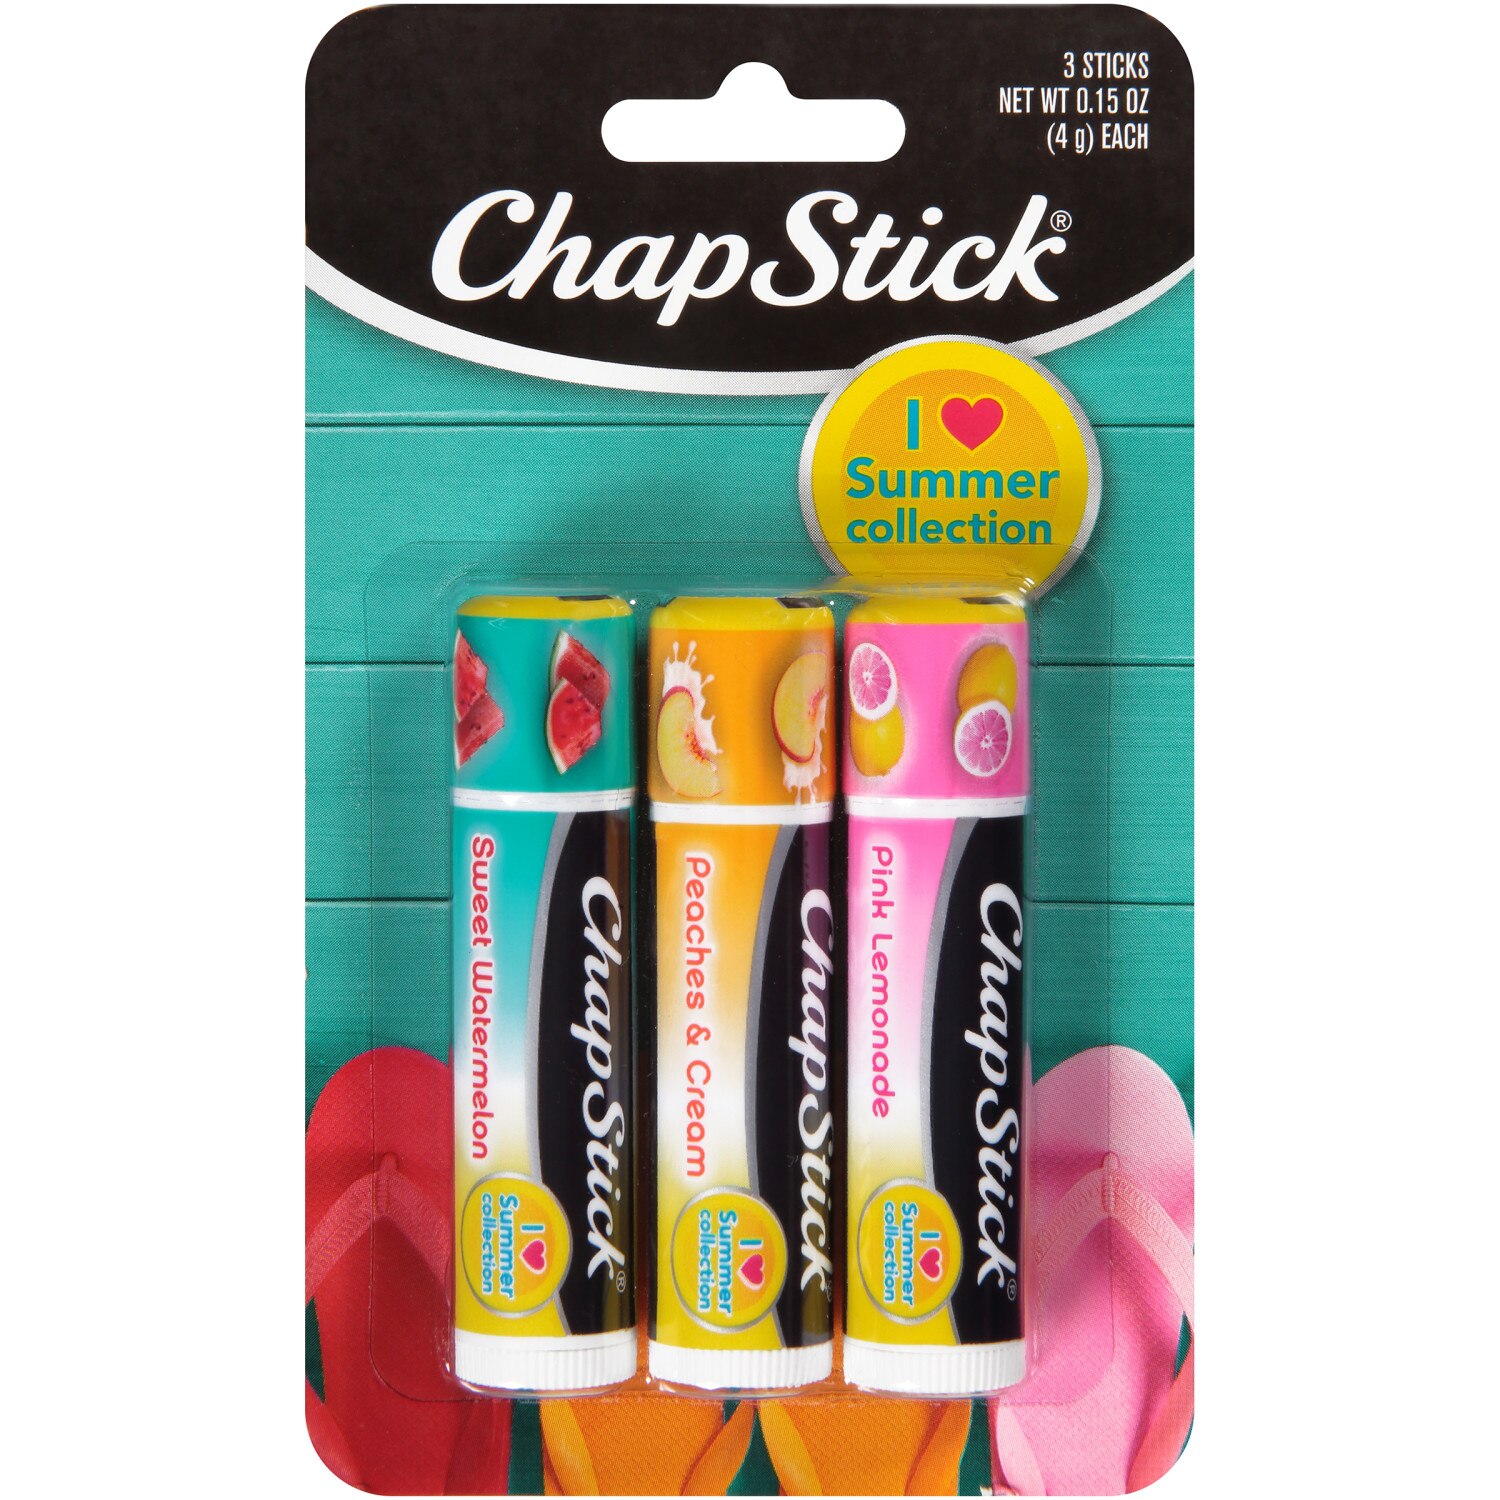 ChapStick Lip Care Variety Pack Collection Flavored Lip Balm Tubes (Sweet Watermelon, Peaches & Cream, Pink Lemonade)